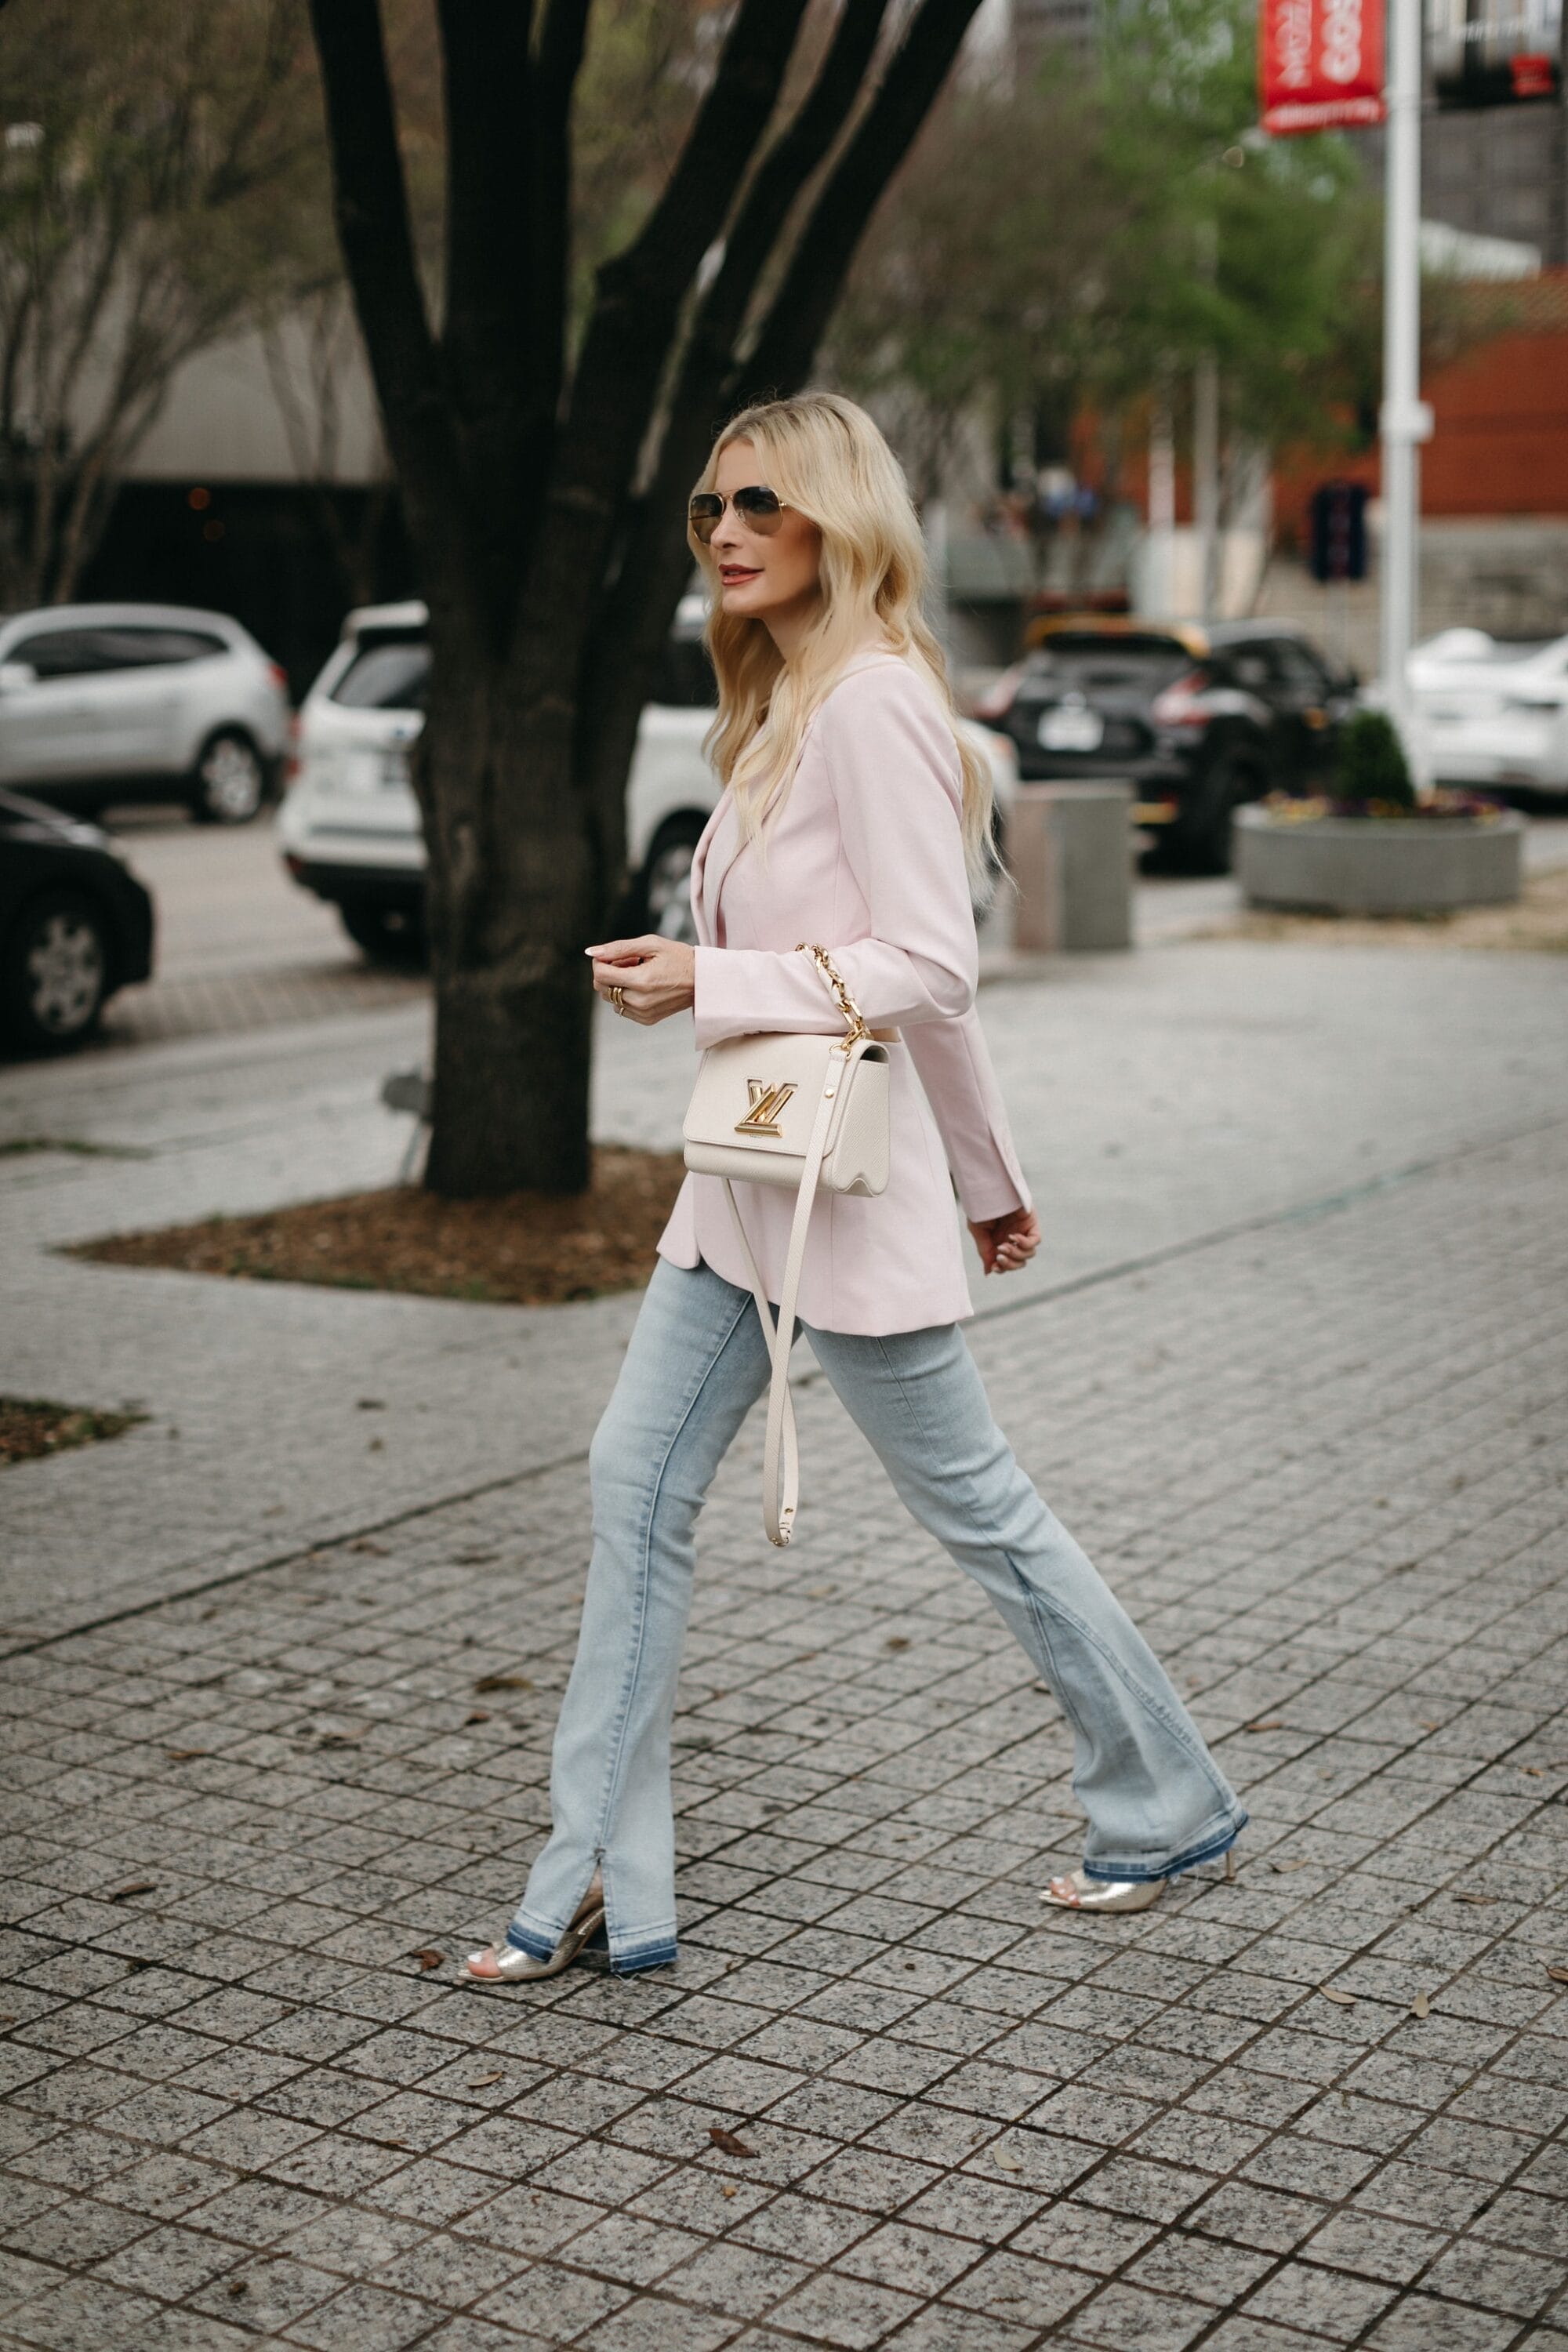 Dallas lady over 40 wearing a cutout blazer with light wash split-hem jeans as one of the top spring denim trends of 2023.